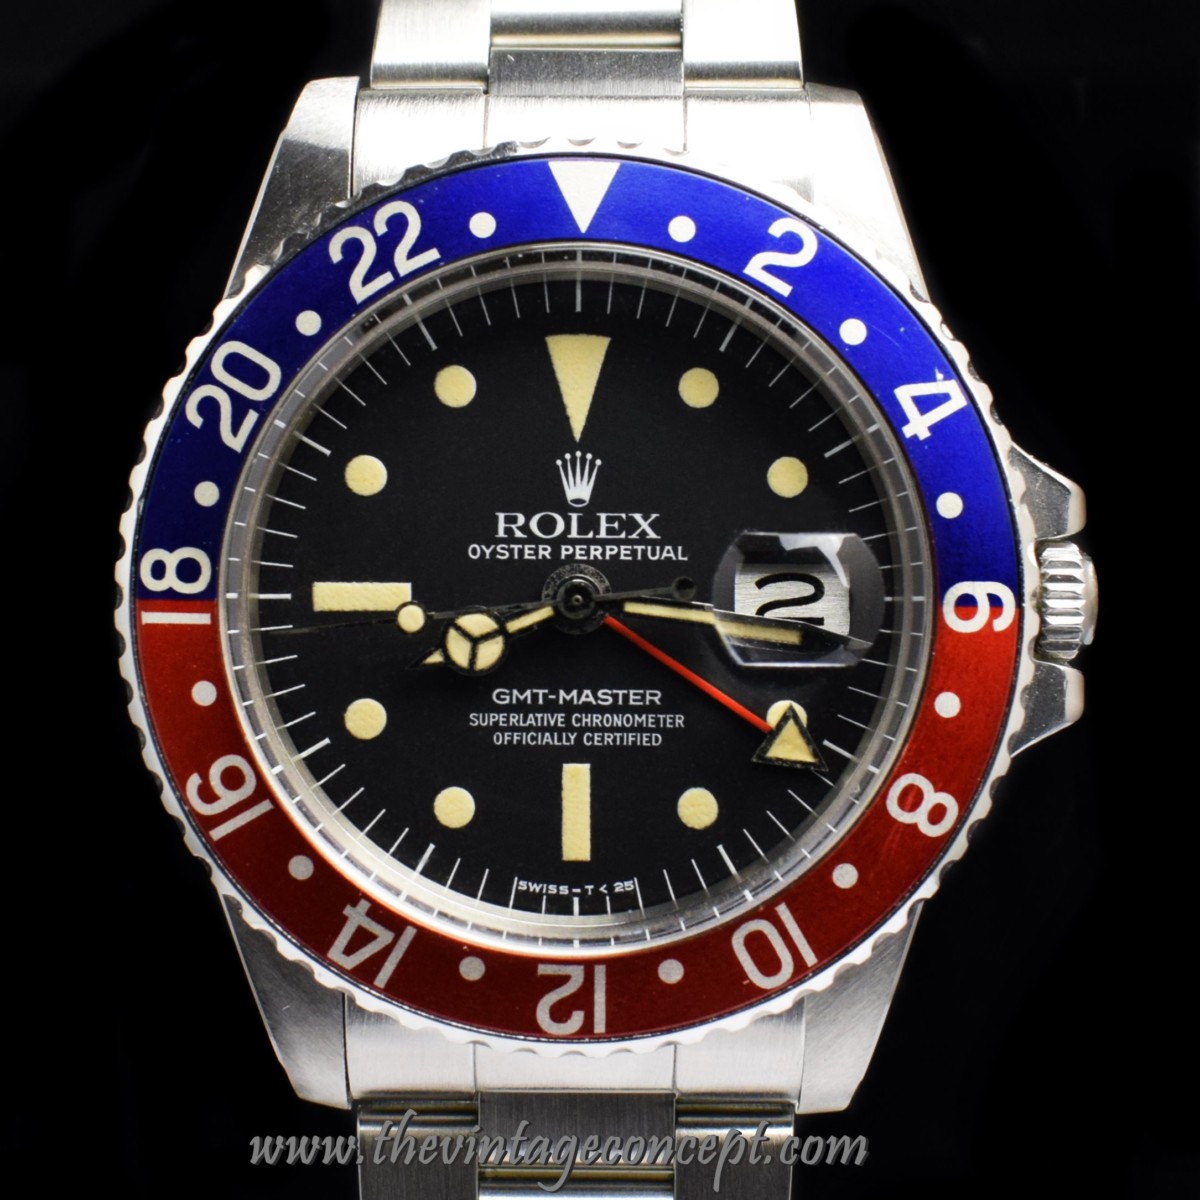 Rolex GMT-Master Radial Dial MK III 